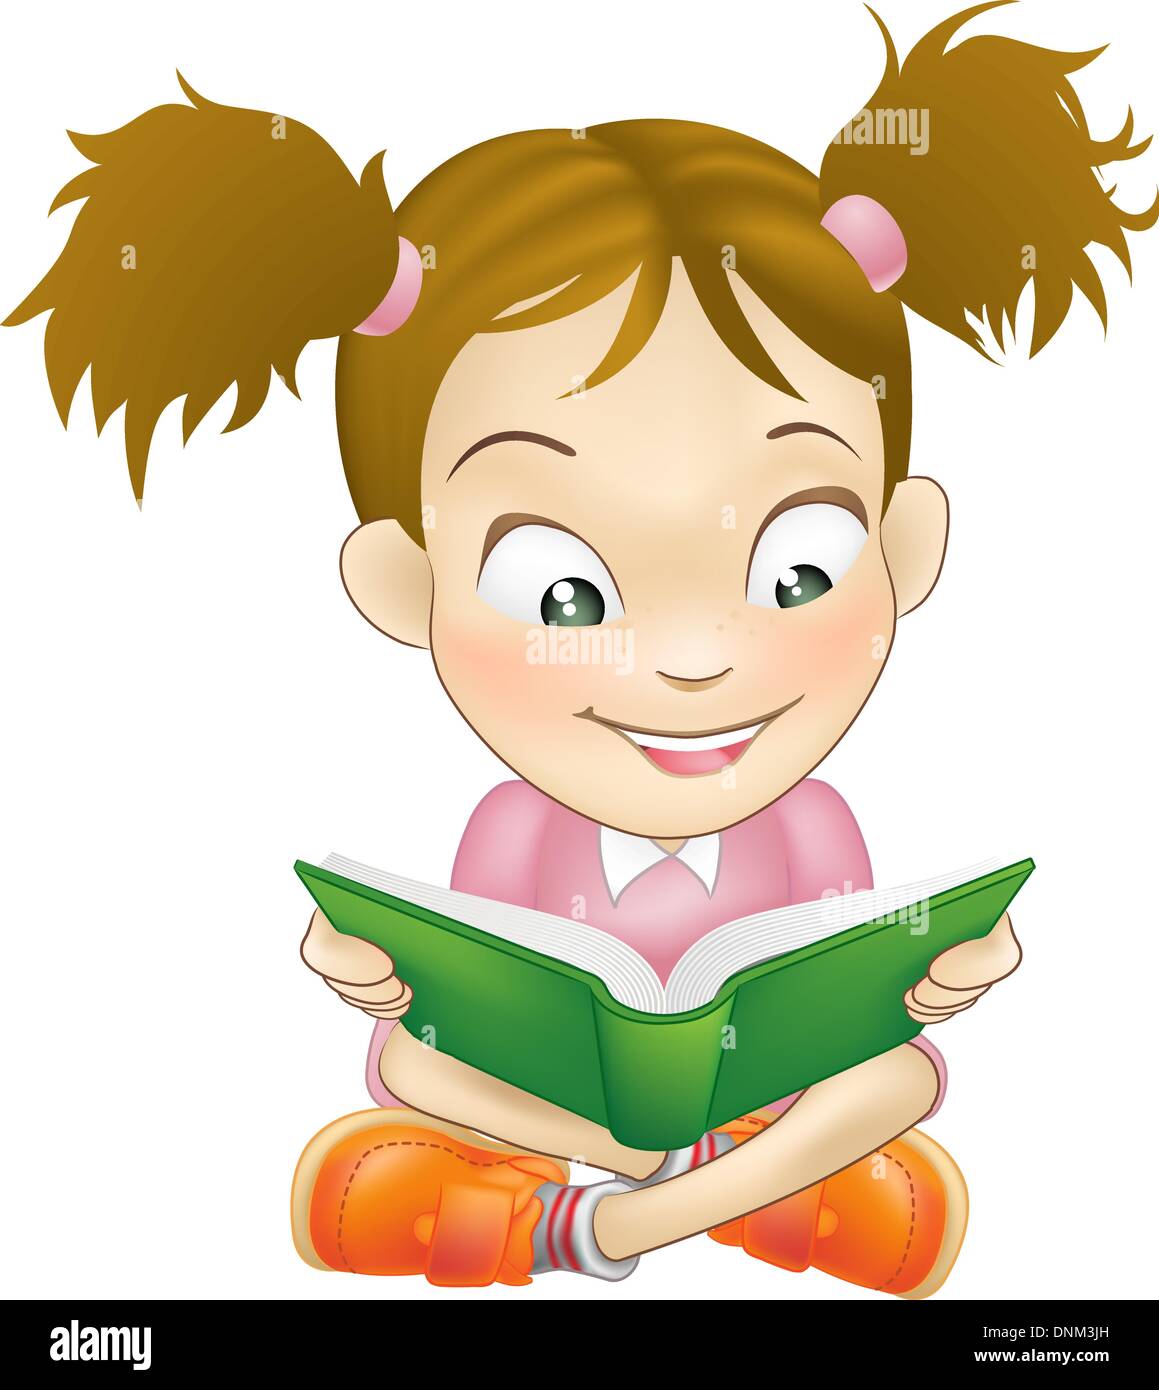 Illustration of a young sweet girl child happily reading a book Stock Vector